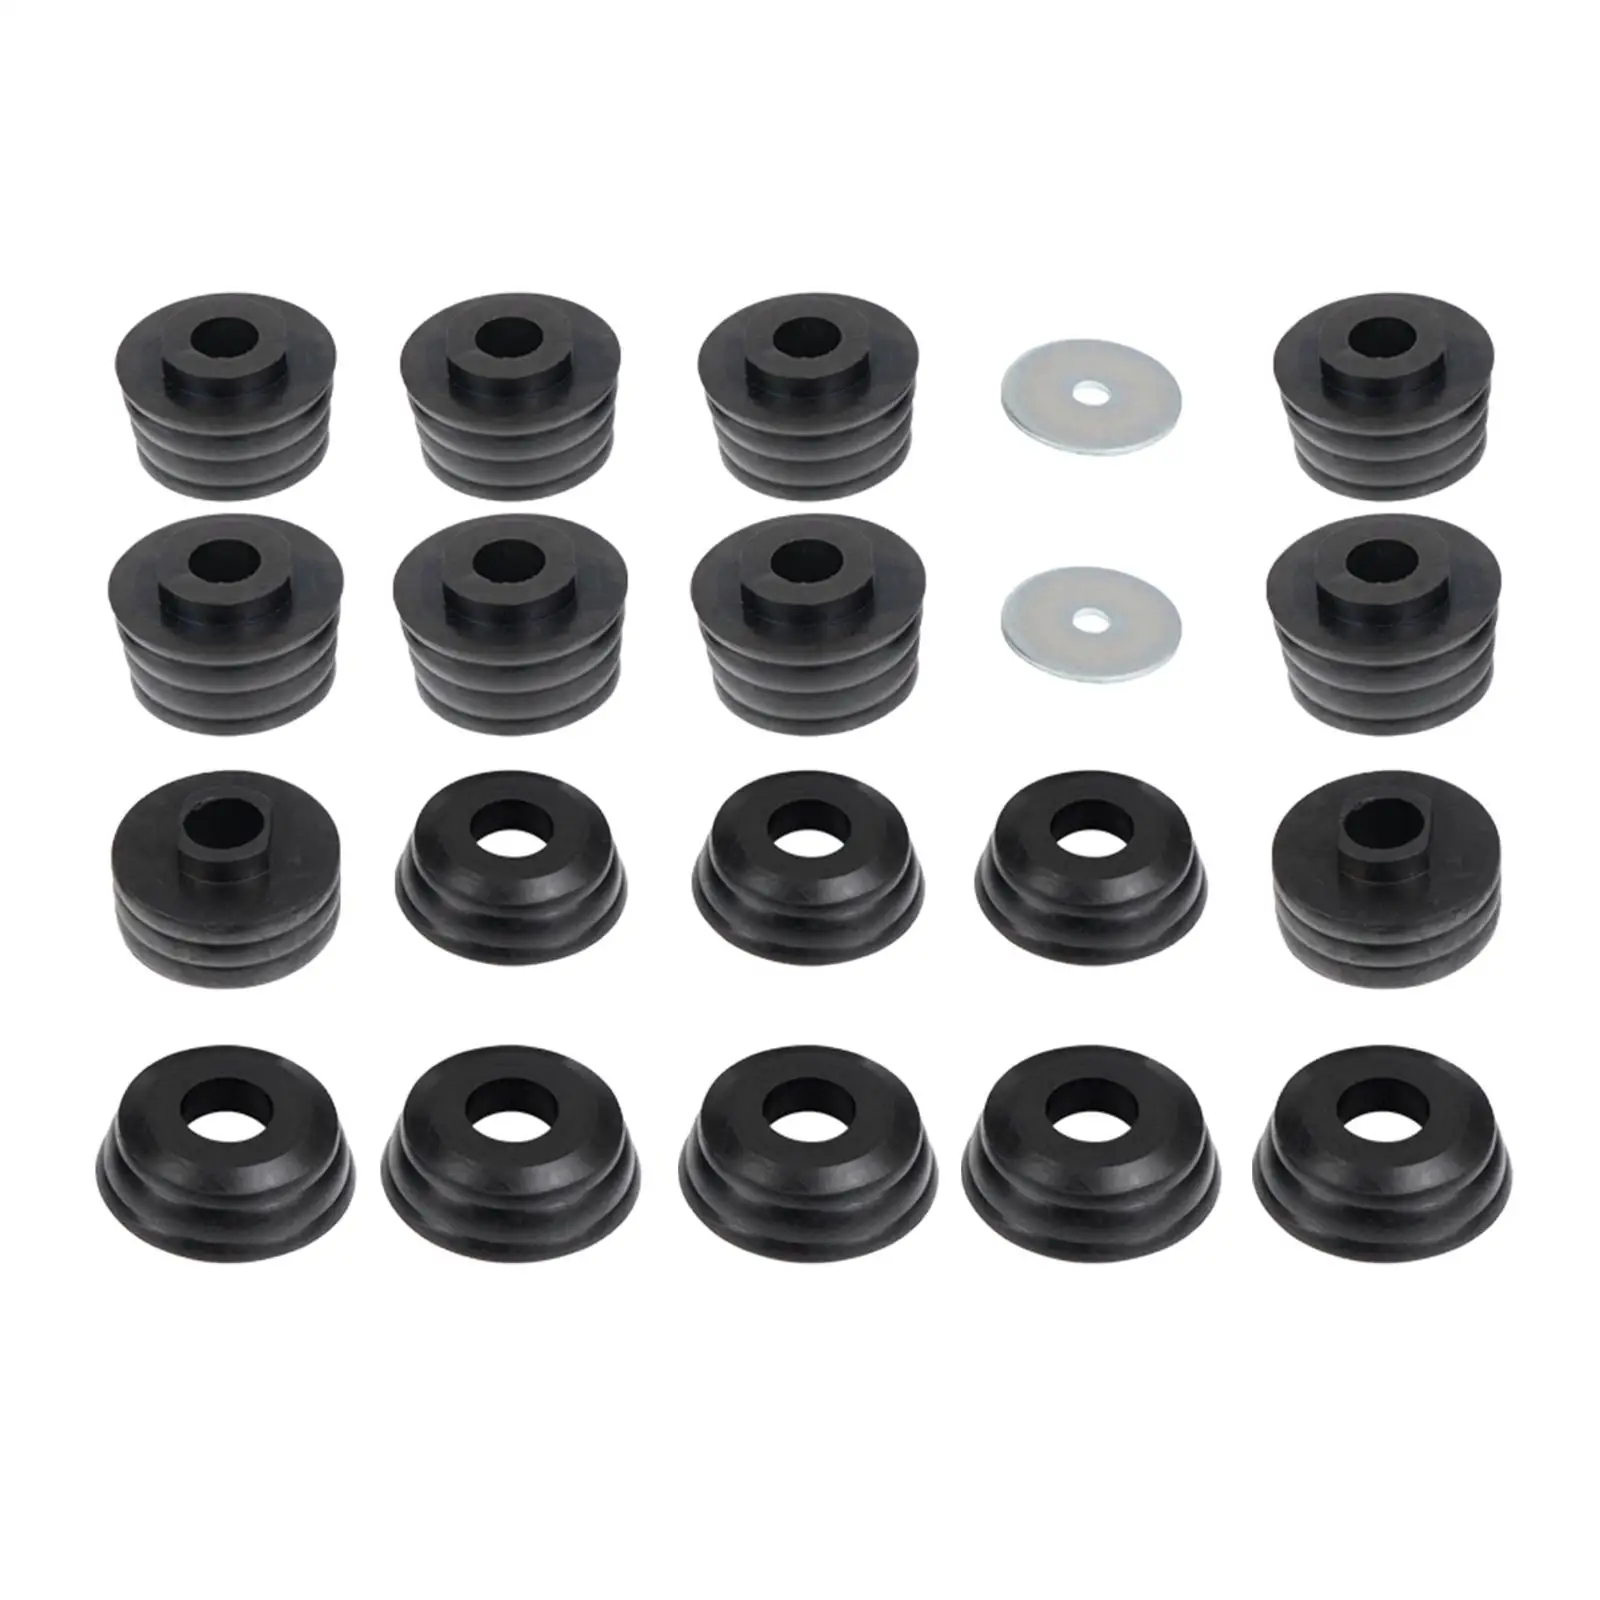 Body Cab Bushings Wear Resistant Professional Body Cab Mounts for GMC Sierra 1500 2500 2WD 4WD 1999-2014 Accessory Replaces